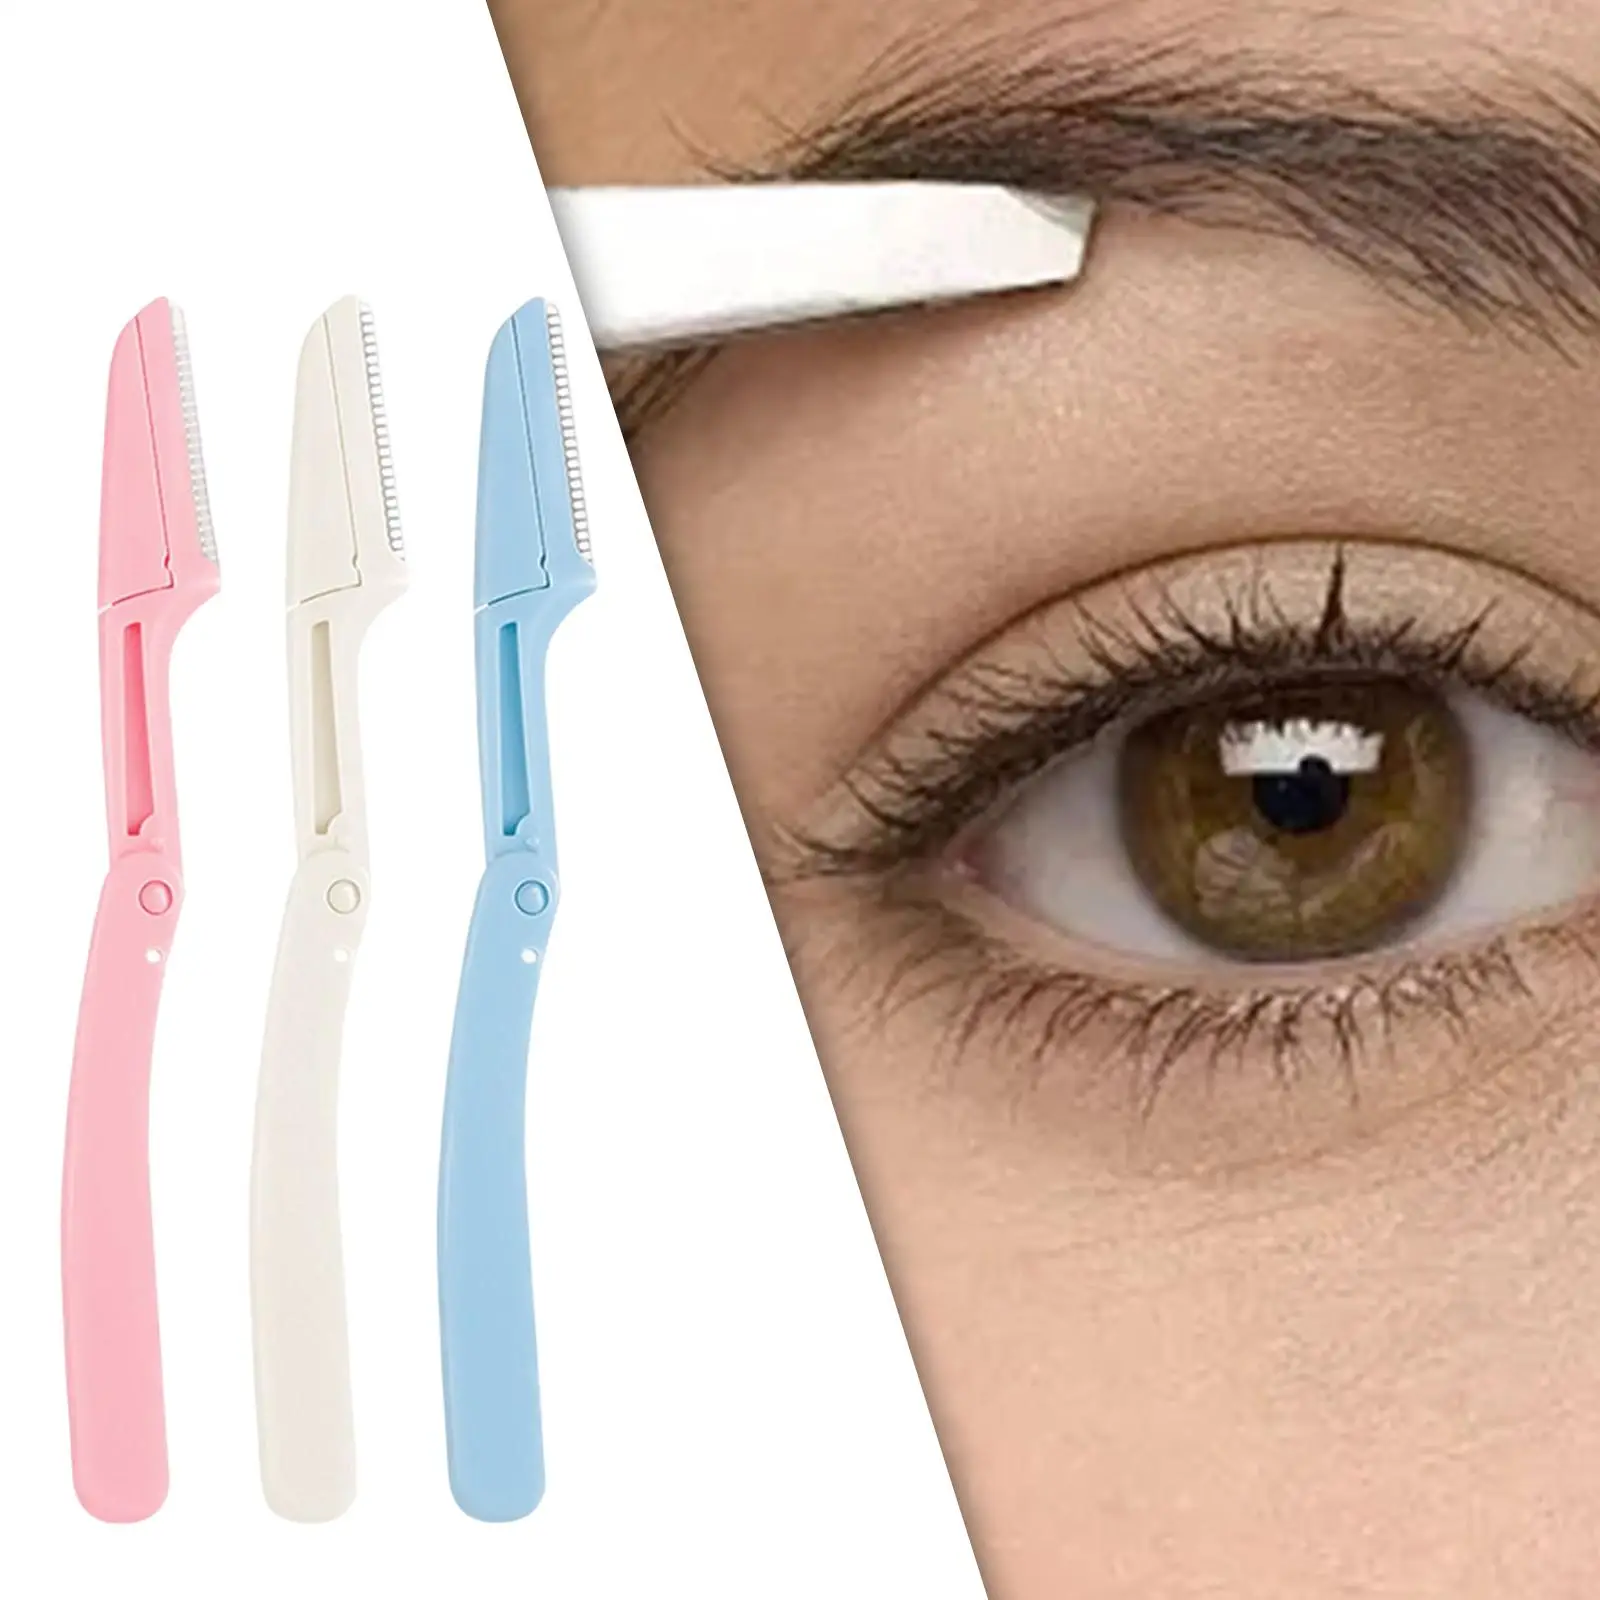 3x Multipurpose Eyebrow Shaper Makeup Tool Smoothing Trimming Women Men Facial Hair Remover for Lips Home legs Face